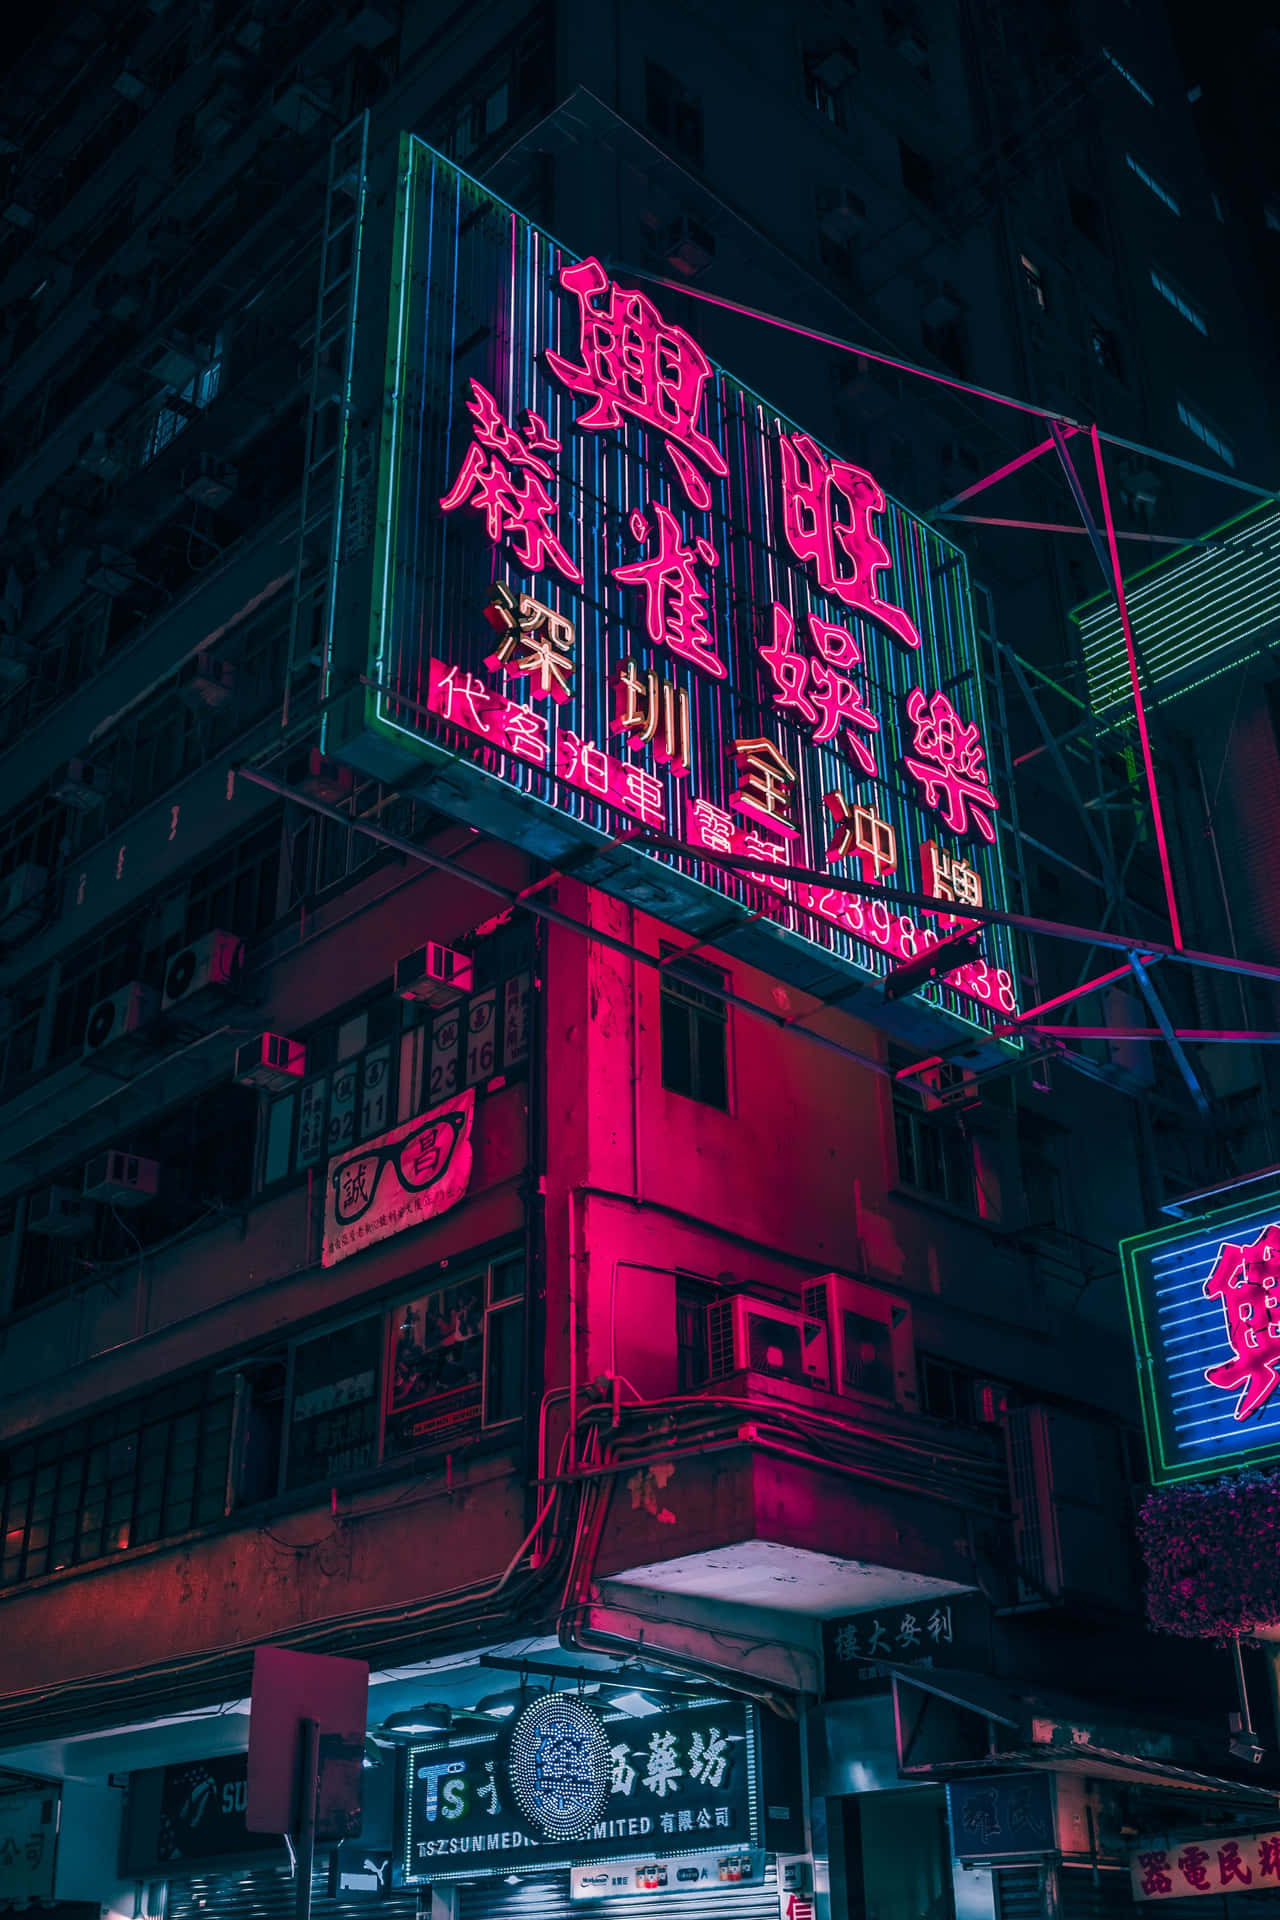 Enjoy a vibrant yet serene experience with this Neon Aesthetic Phone. Wallpaper